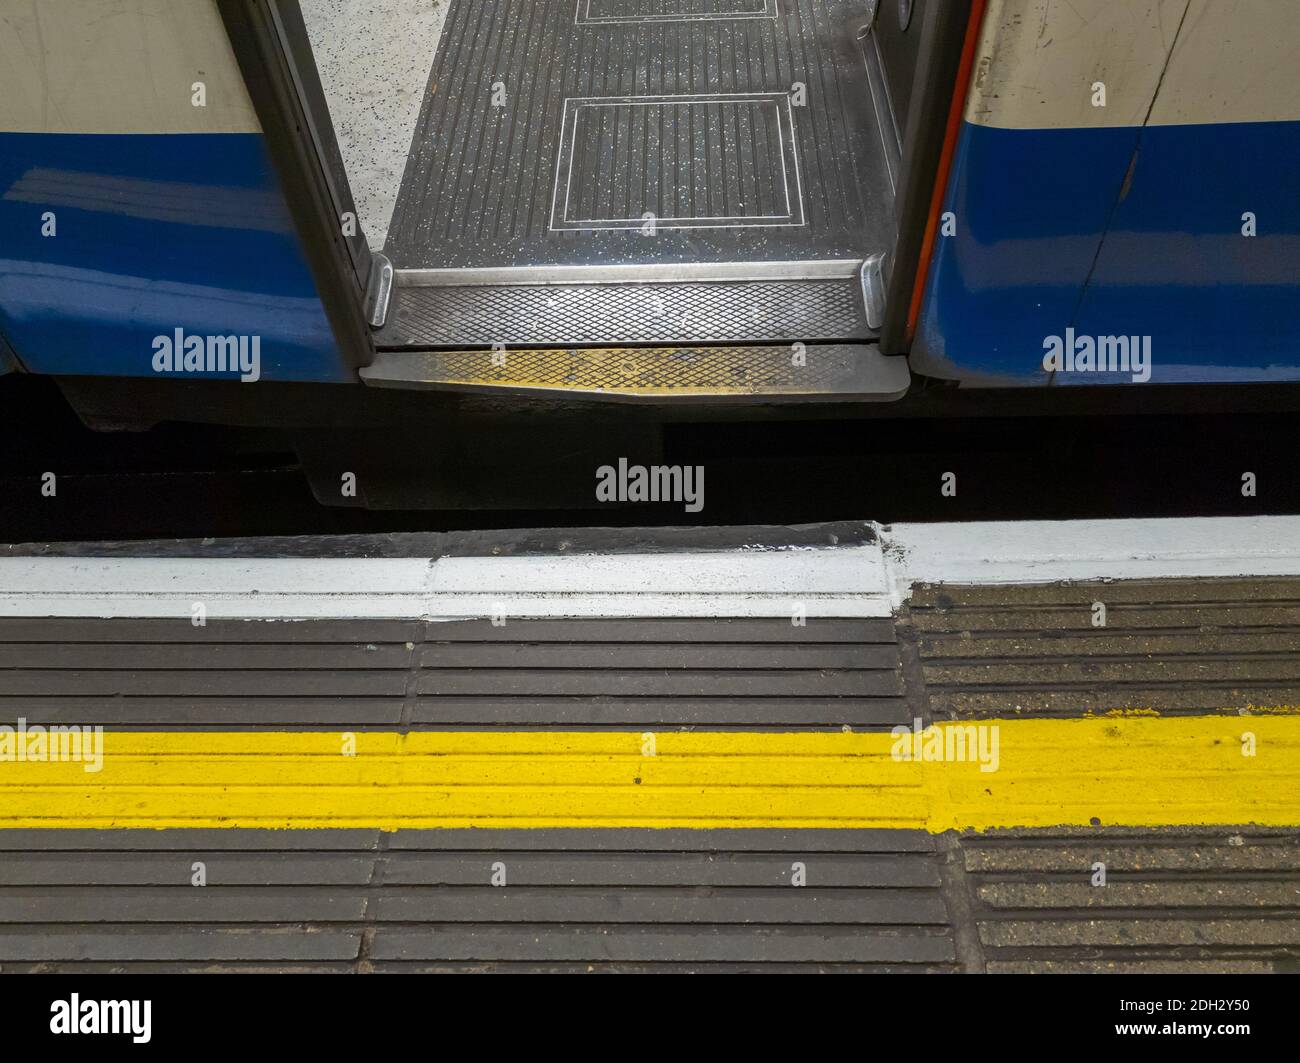 A safety yellow and white line painted on a train platform. Stock Photo